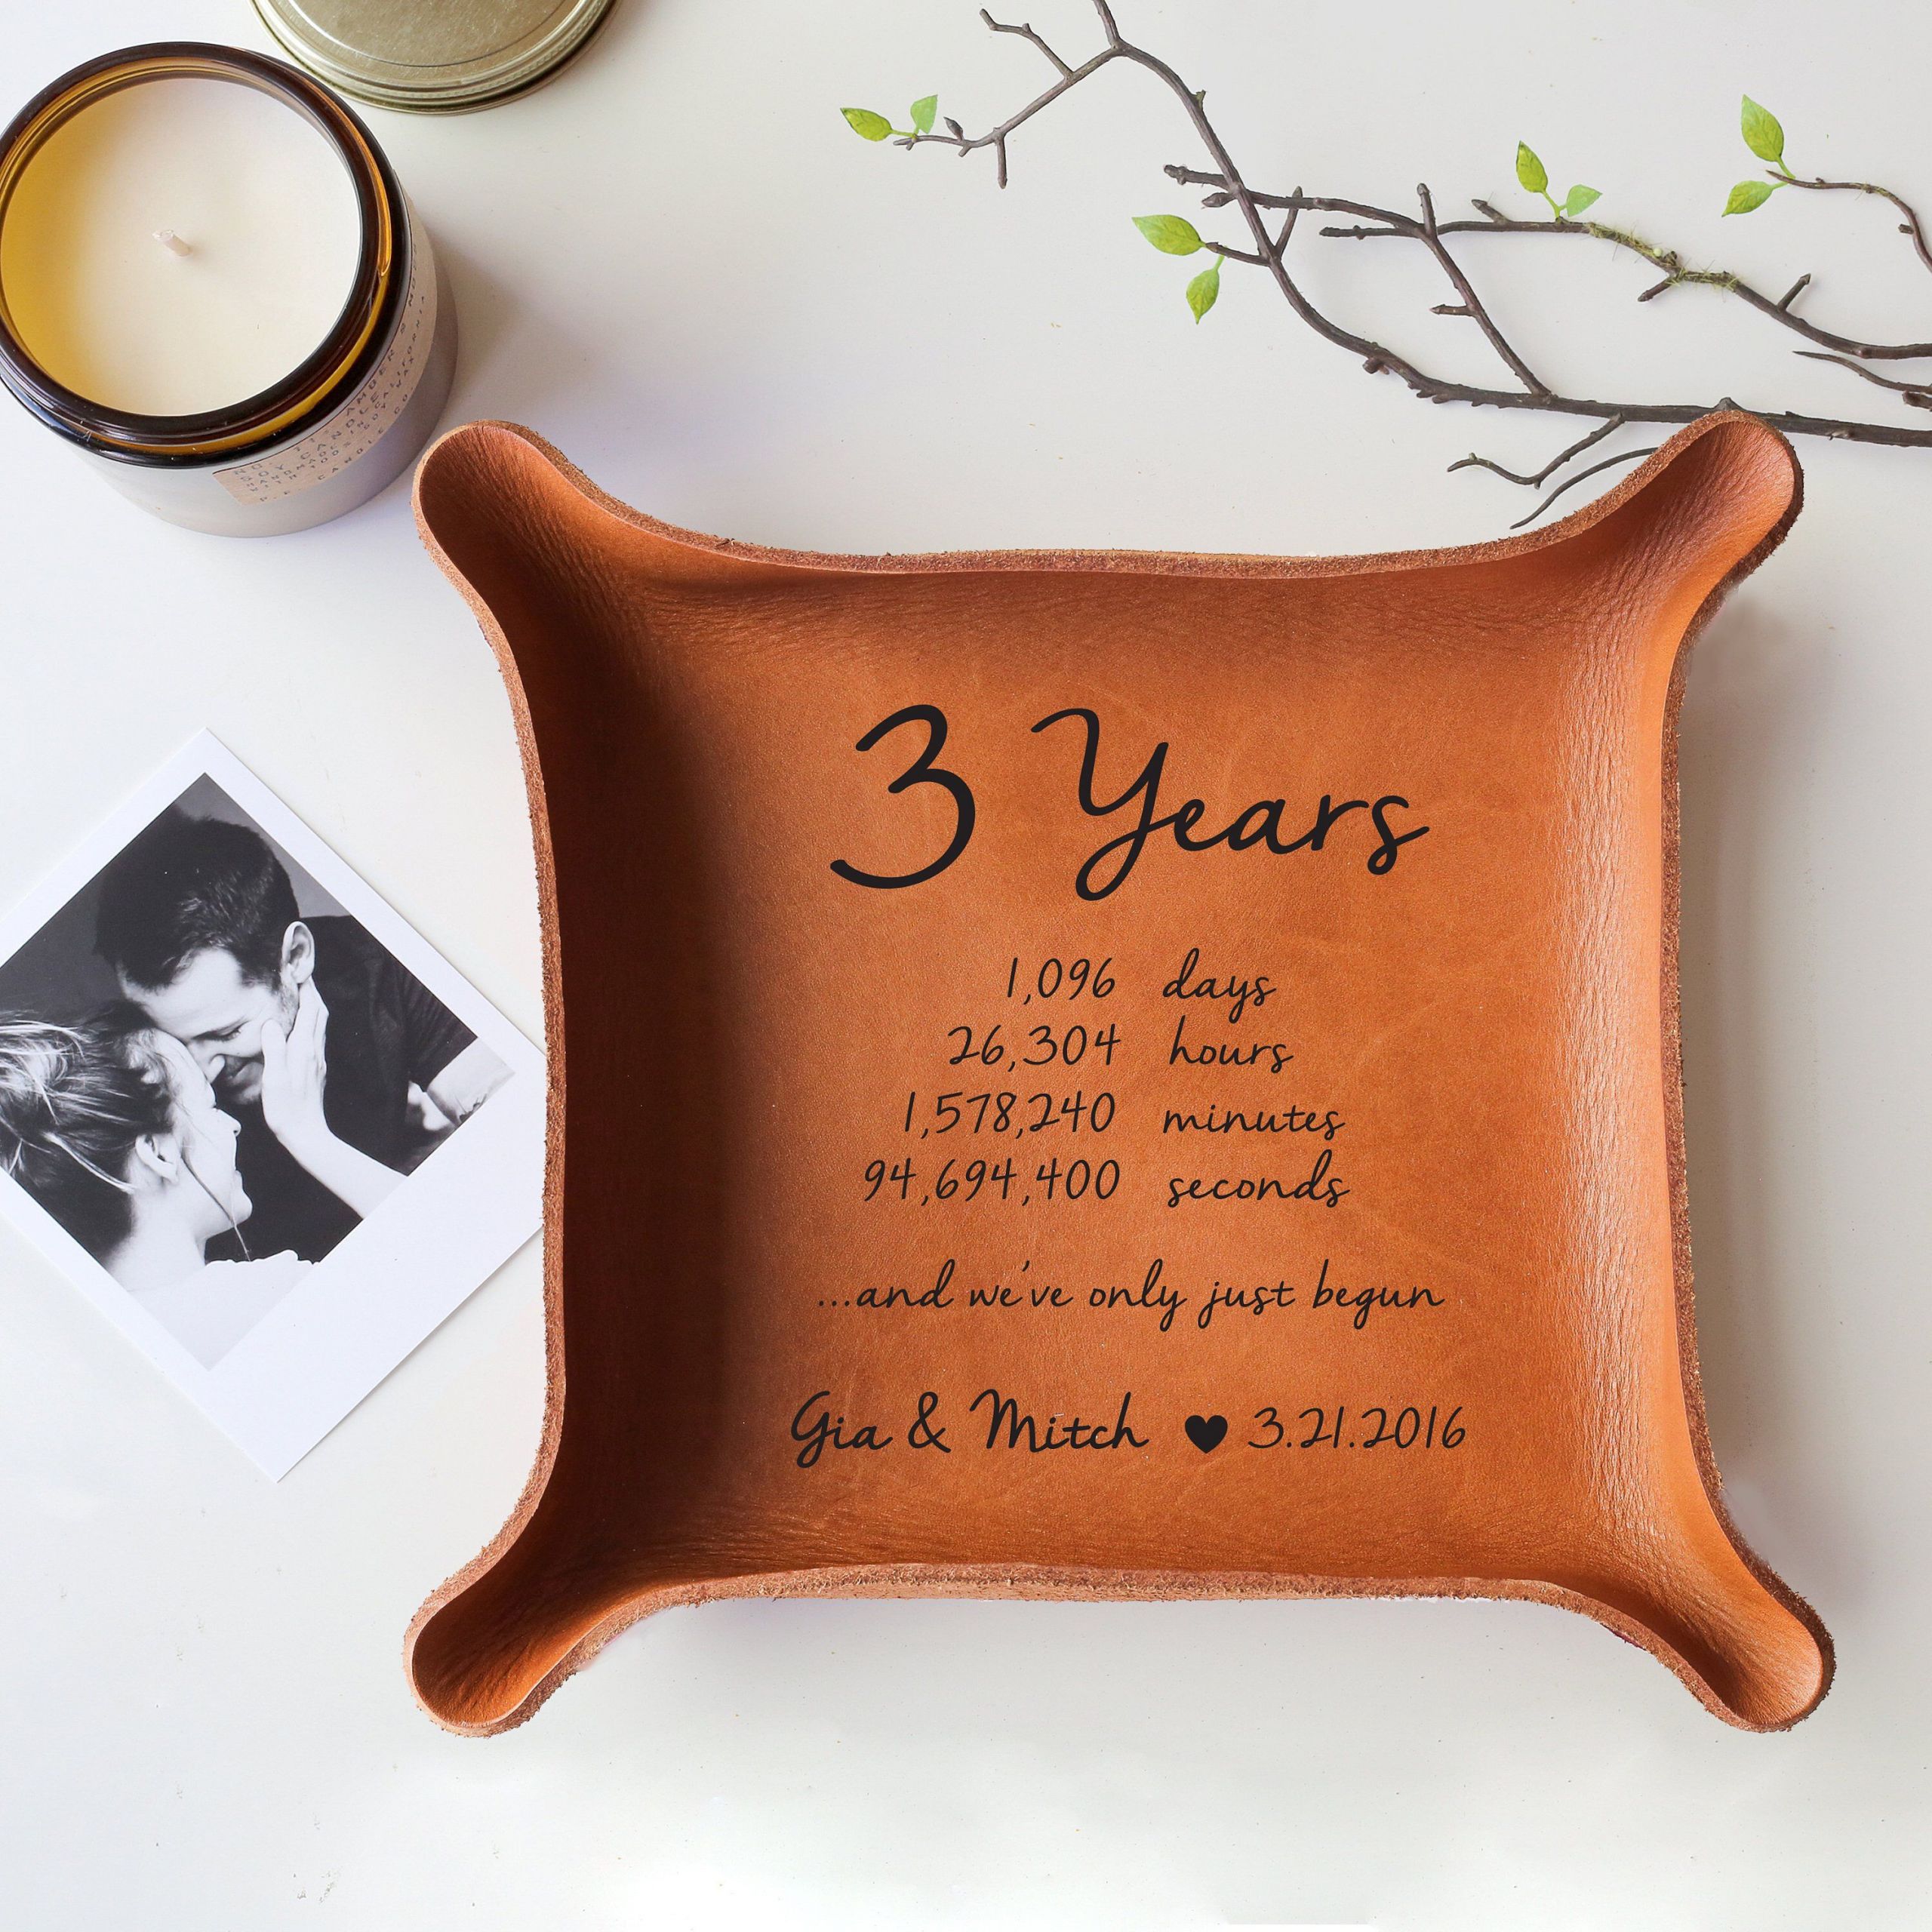 3 Year Anniversary Leather Gift Ideas For Him
 Leather Tray with Your Vows or Song Leather Anniversary